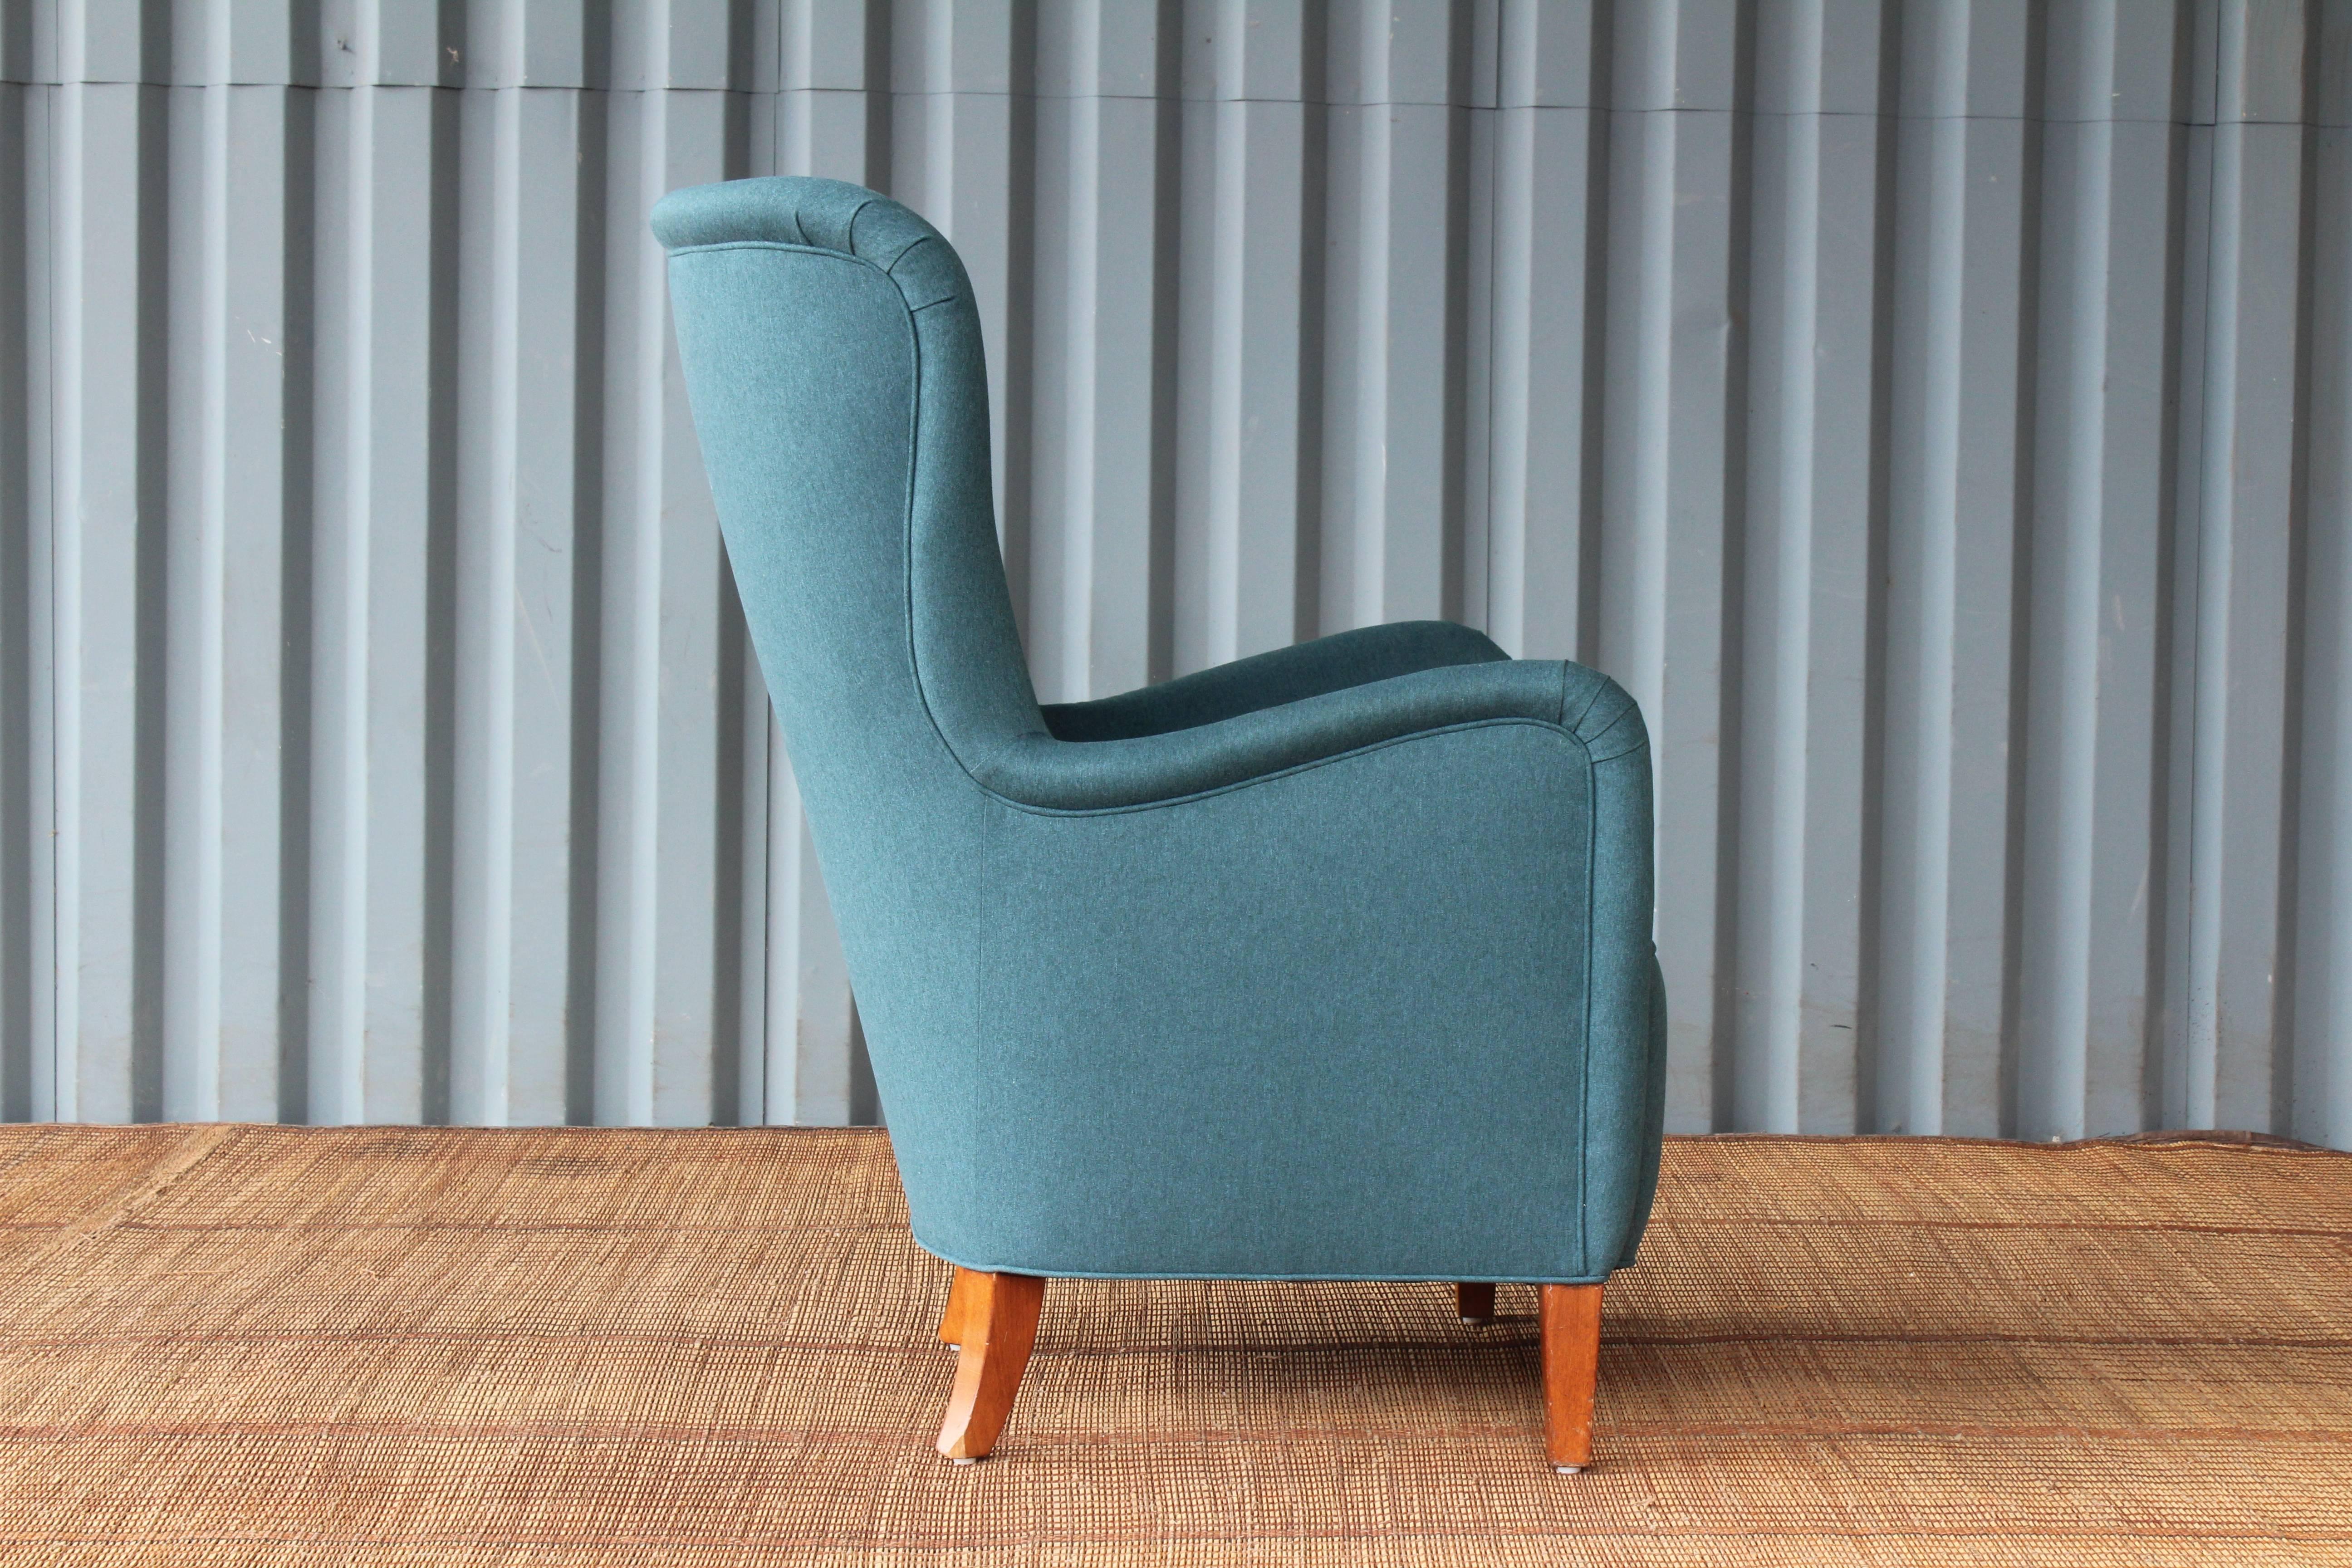 Early Modern armchair designed by Ernest Race, 1940s, England. Recently upholstered in a beautiful dark teal fabric. His and her pair available.